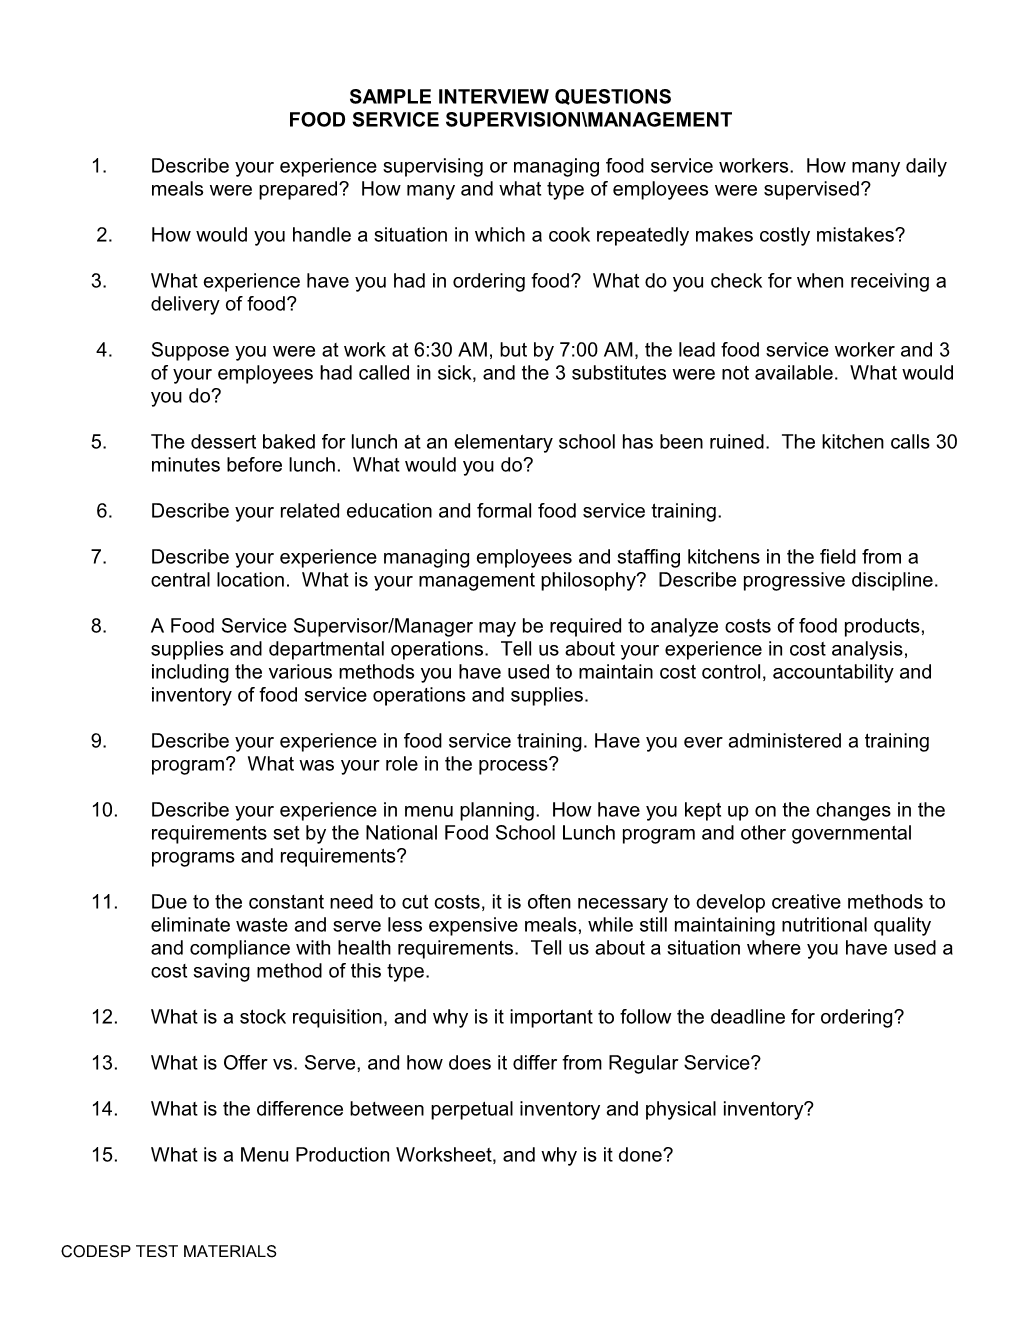 Sample Food Service Supervision Management Interview Questions